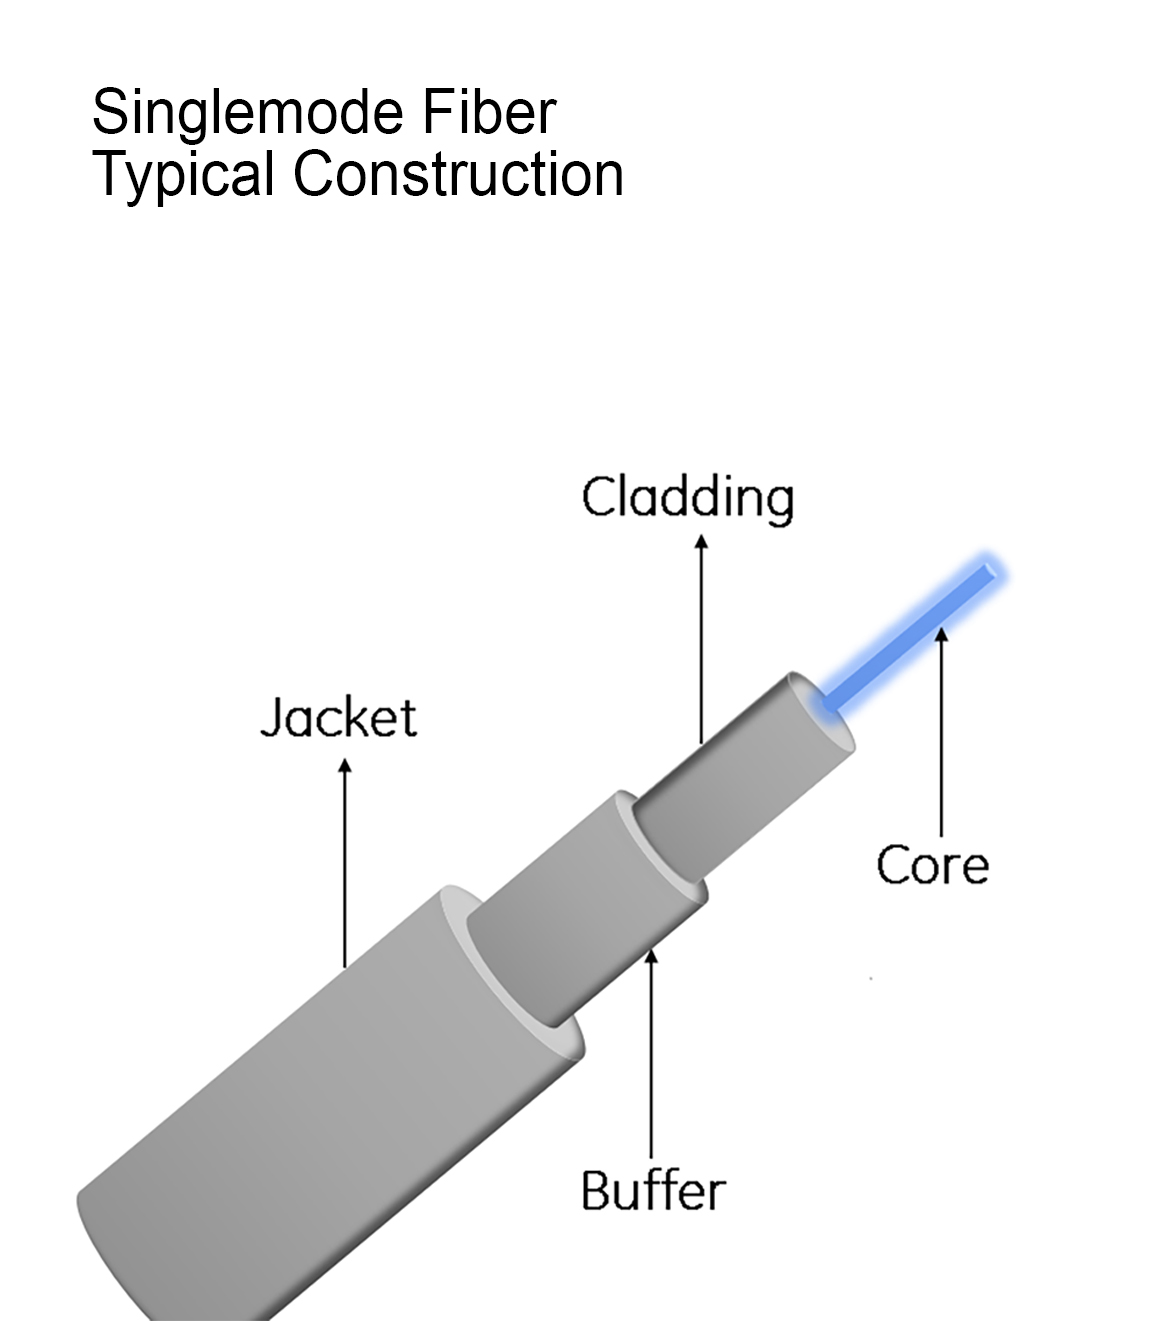 _1_A-Quick-Introduction-to-Single-mode-Fiber-Optical-Cable.jpg